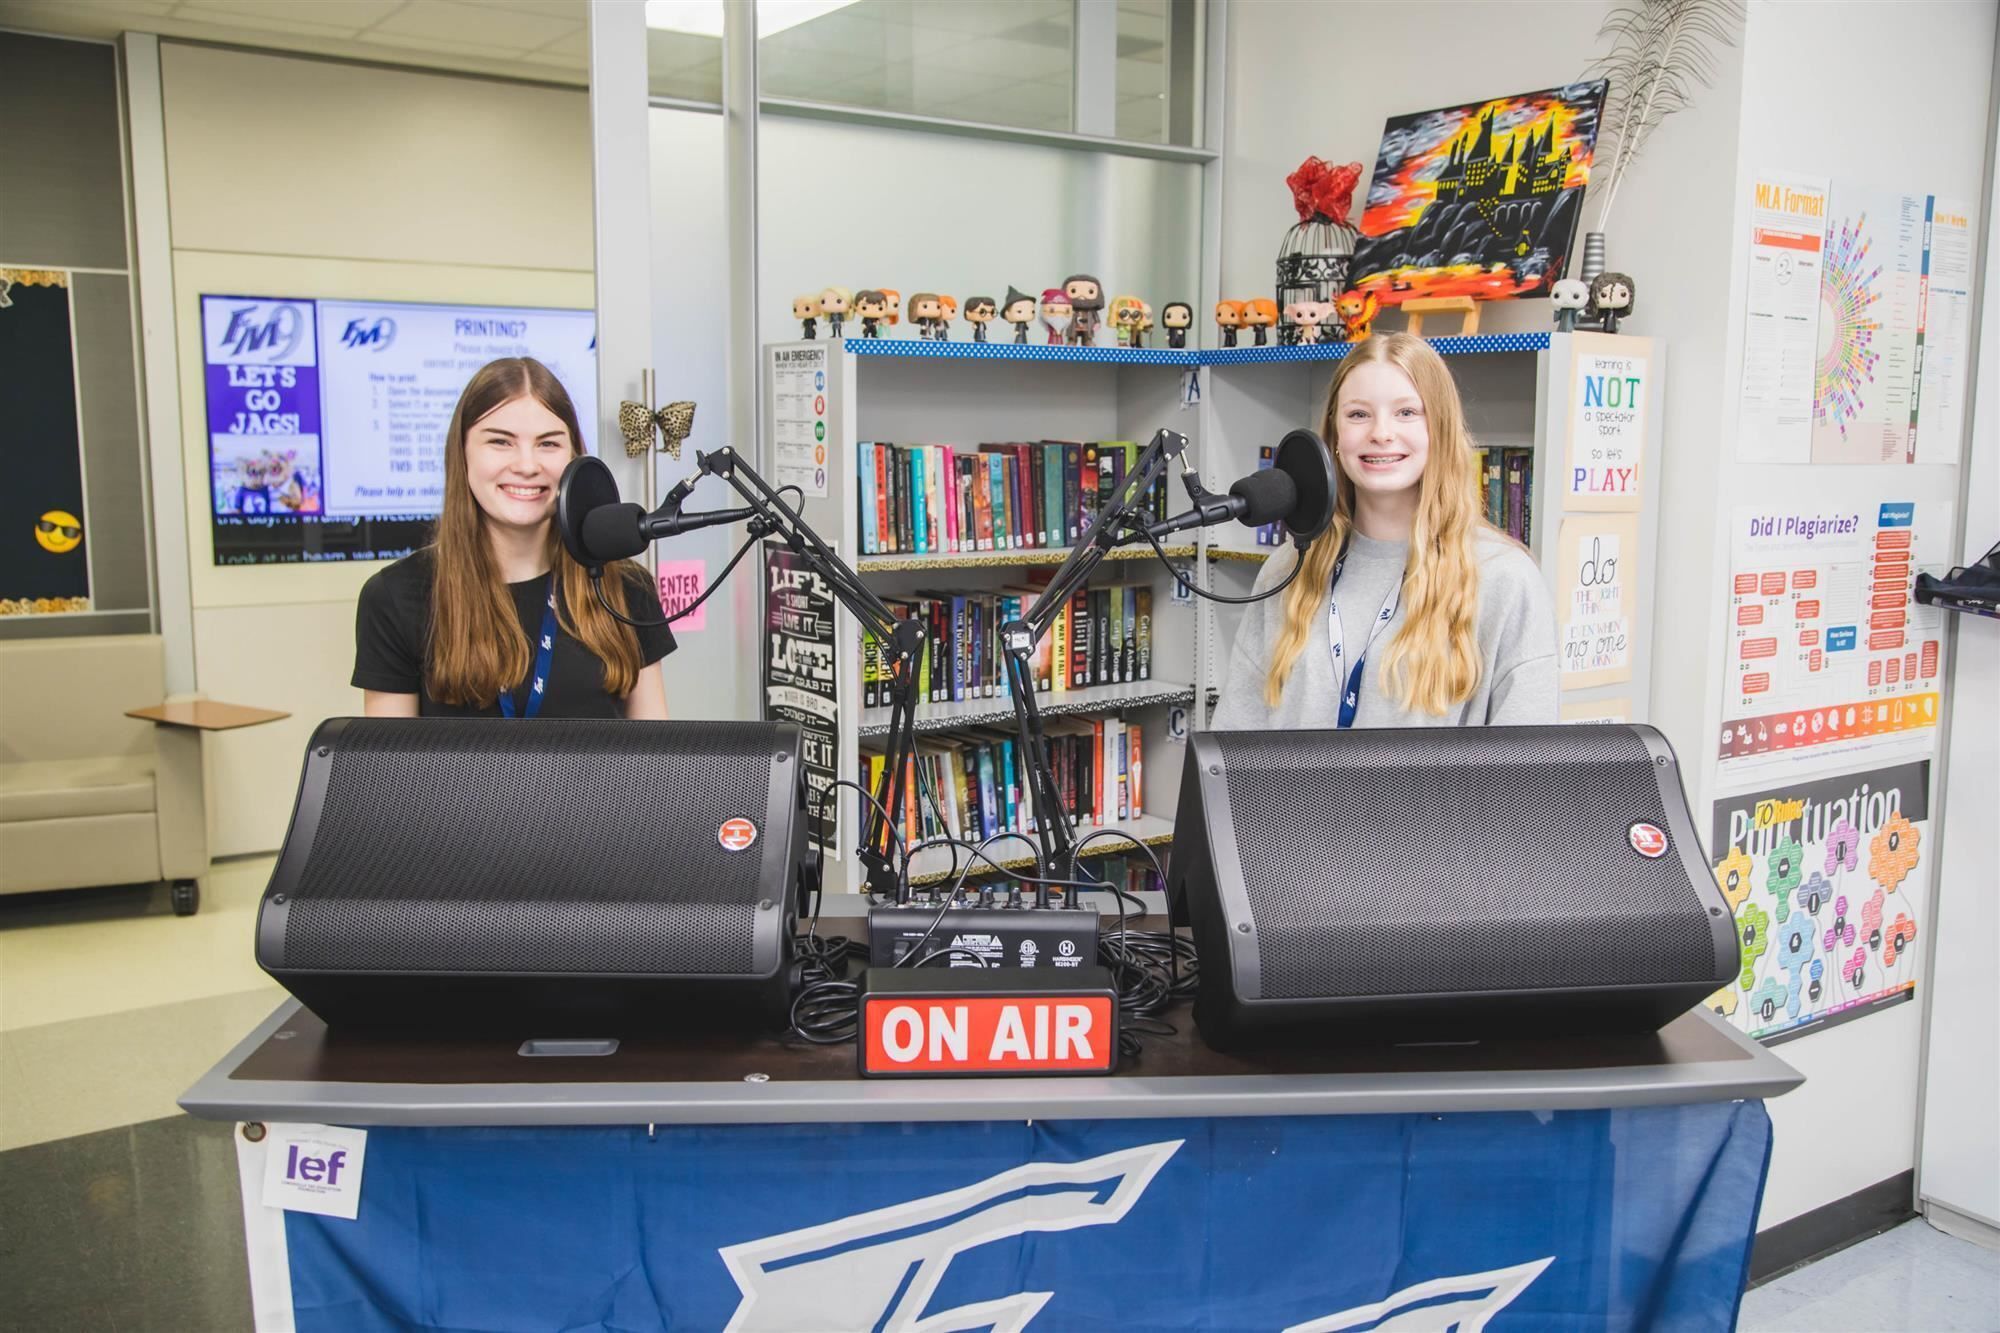 Two students smiling behind the new broadcasting equipment bought from the LEF grant.